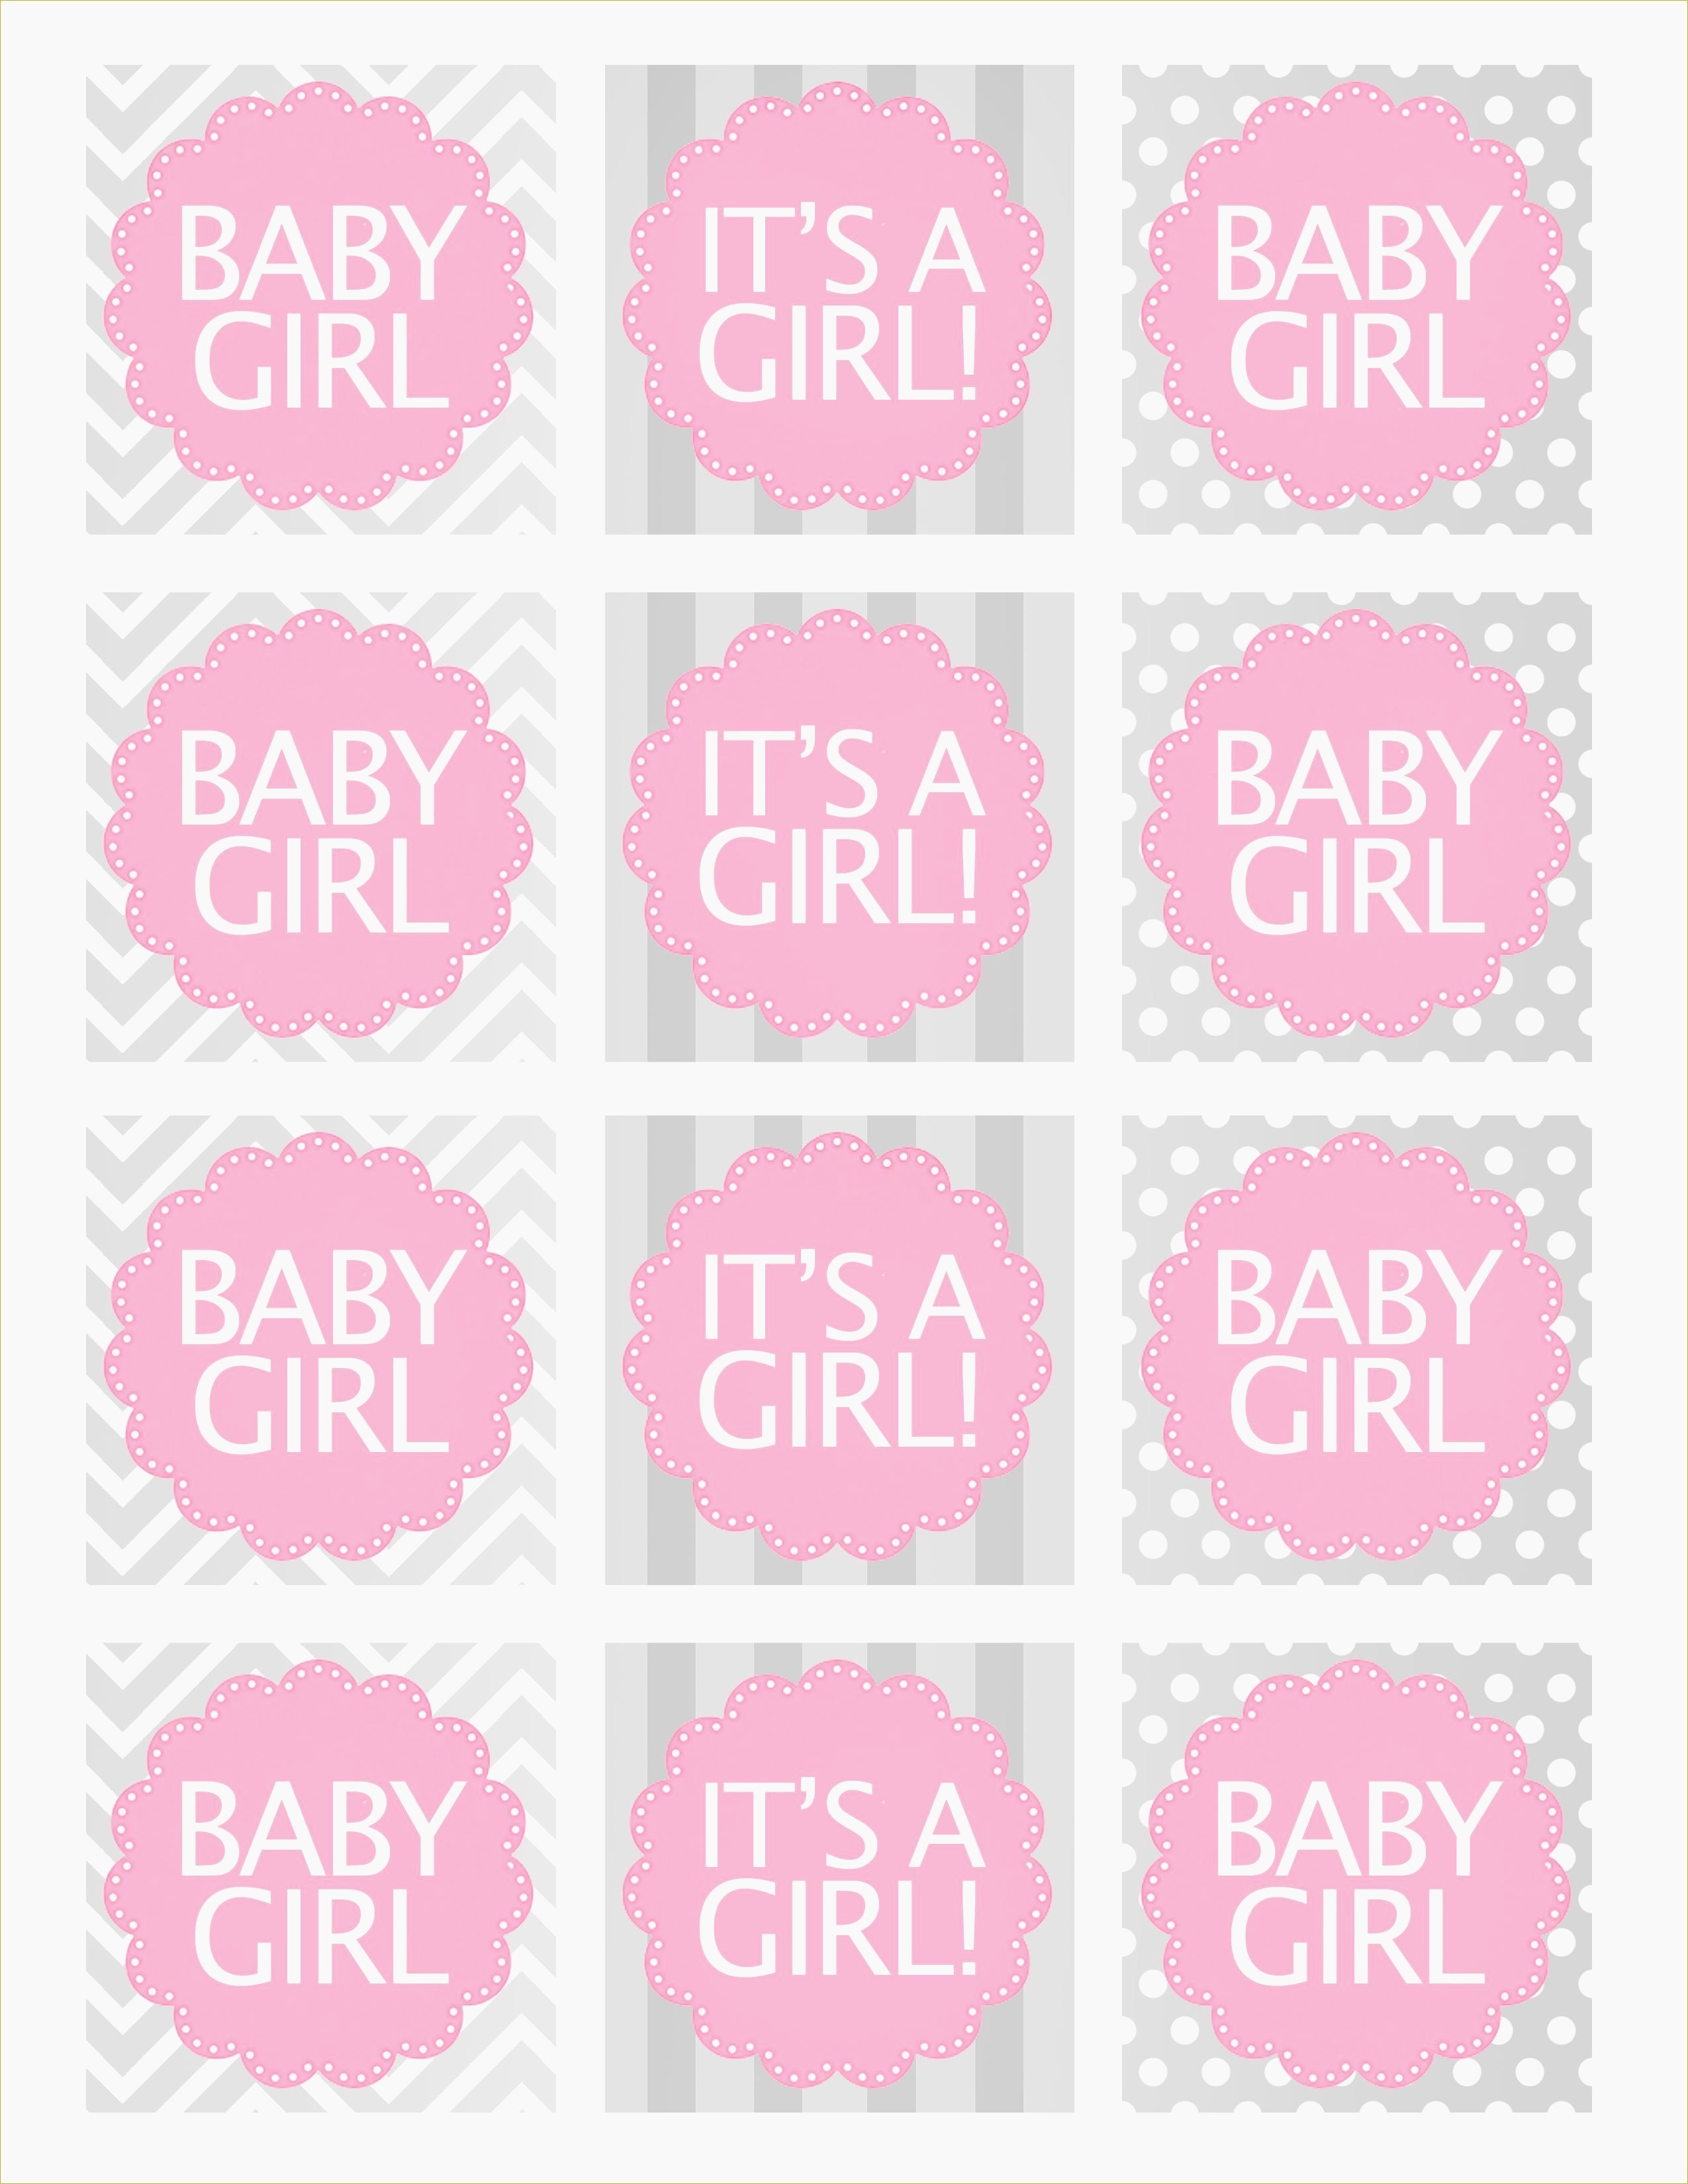 Inspirational Elephant Baby Shower Templates | Www.pantry-Magic - Free Printable Baby Shower Favor Tags